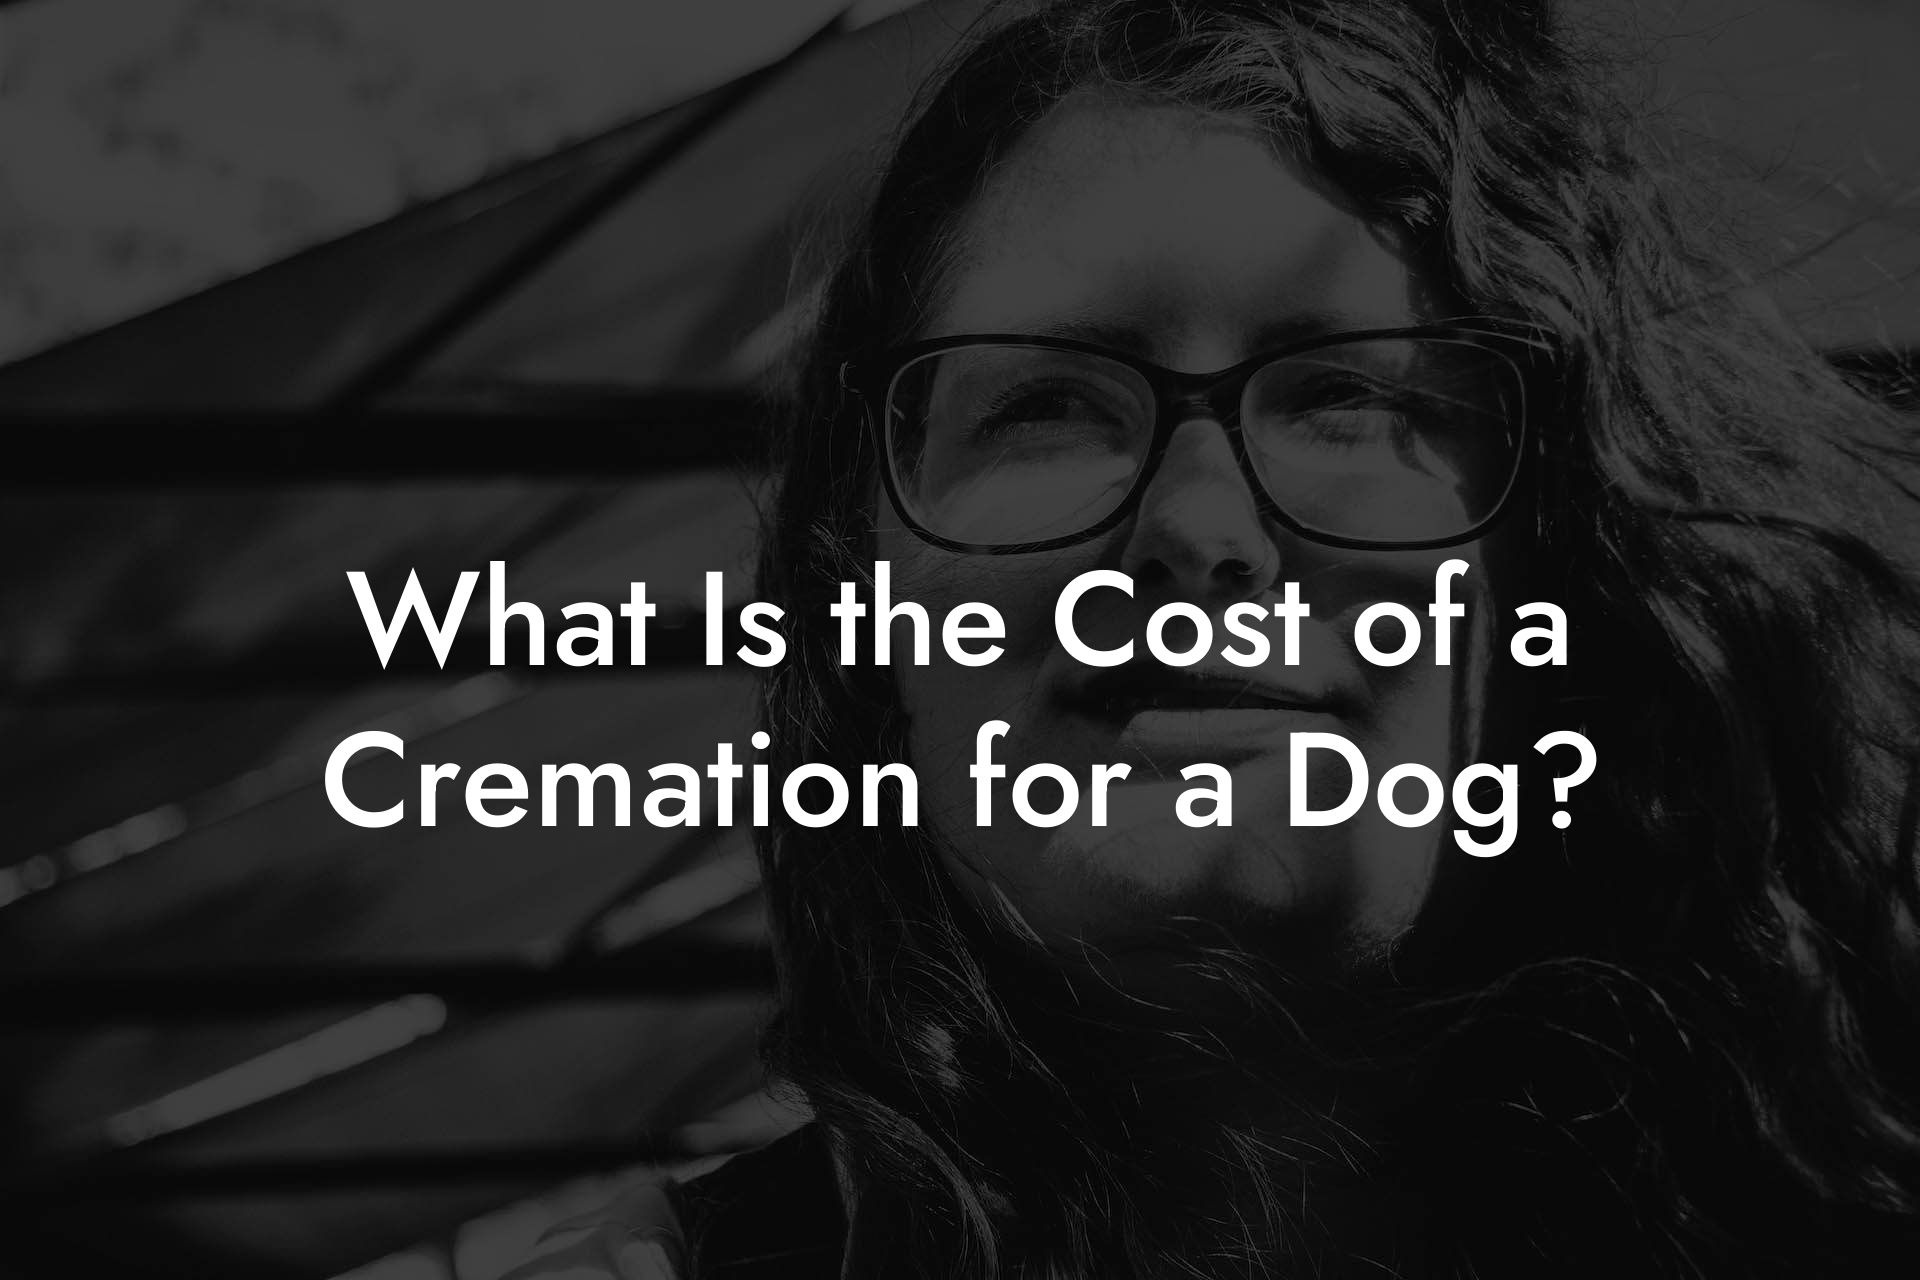 What Is the Cost of a Cremation for a Dog?